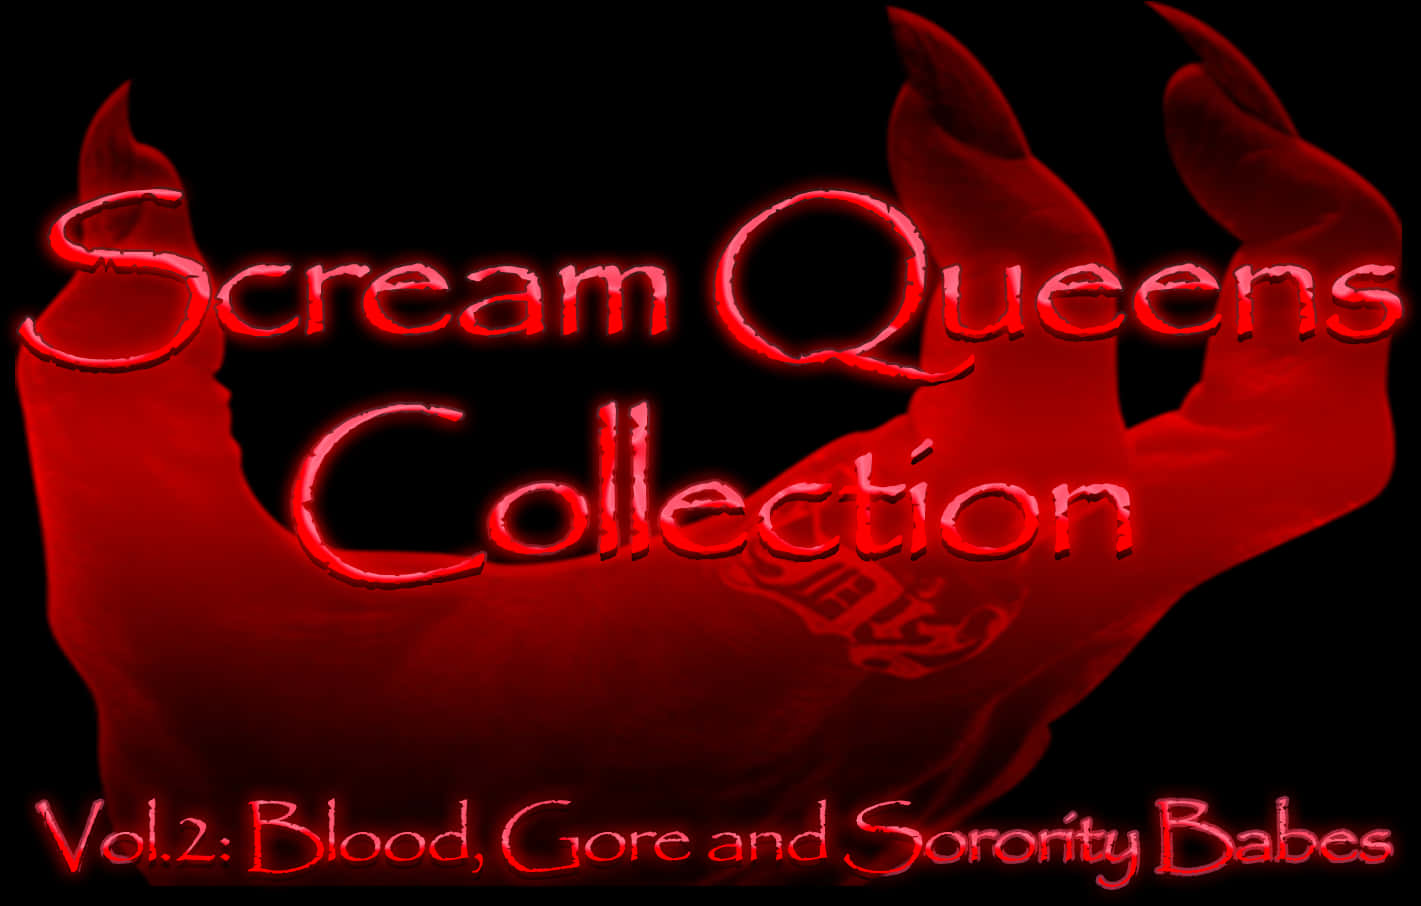 Scream Queens Collection Red Aesthetic